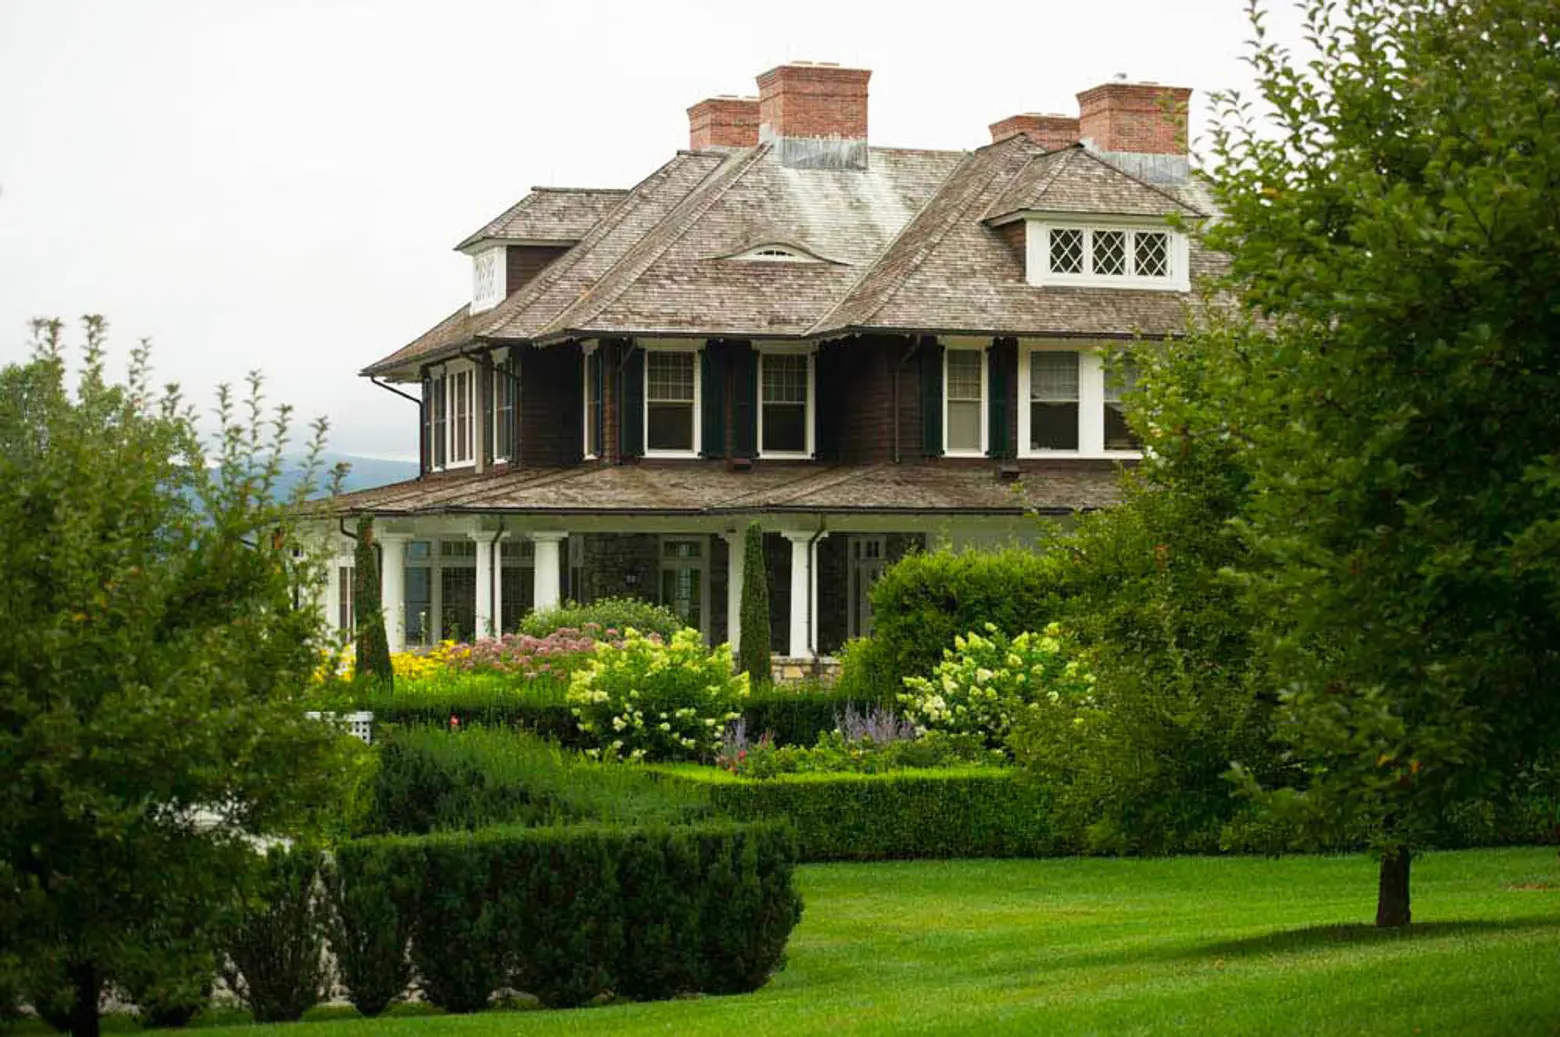 Gardener’s Majestic Hudson River Home Is Surrounded by Edible Gardens